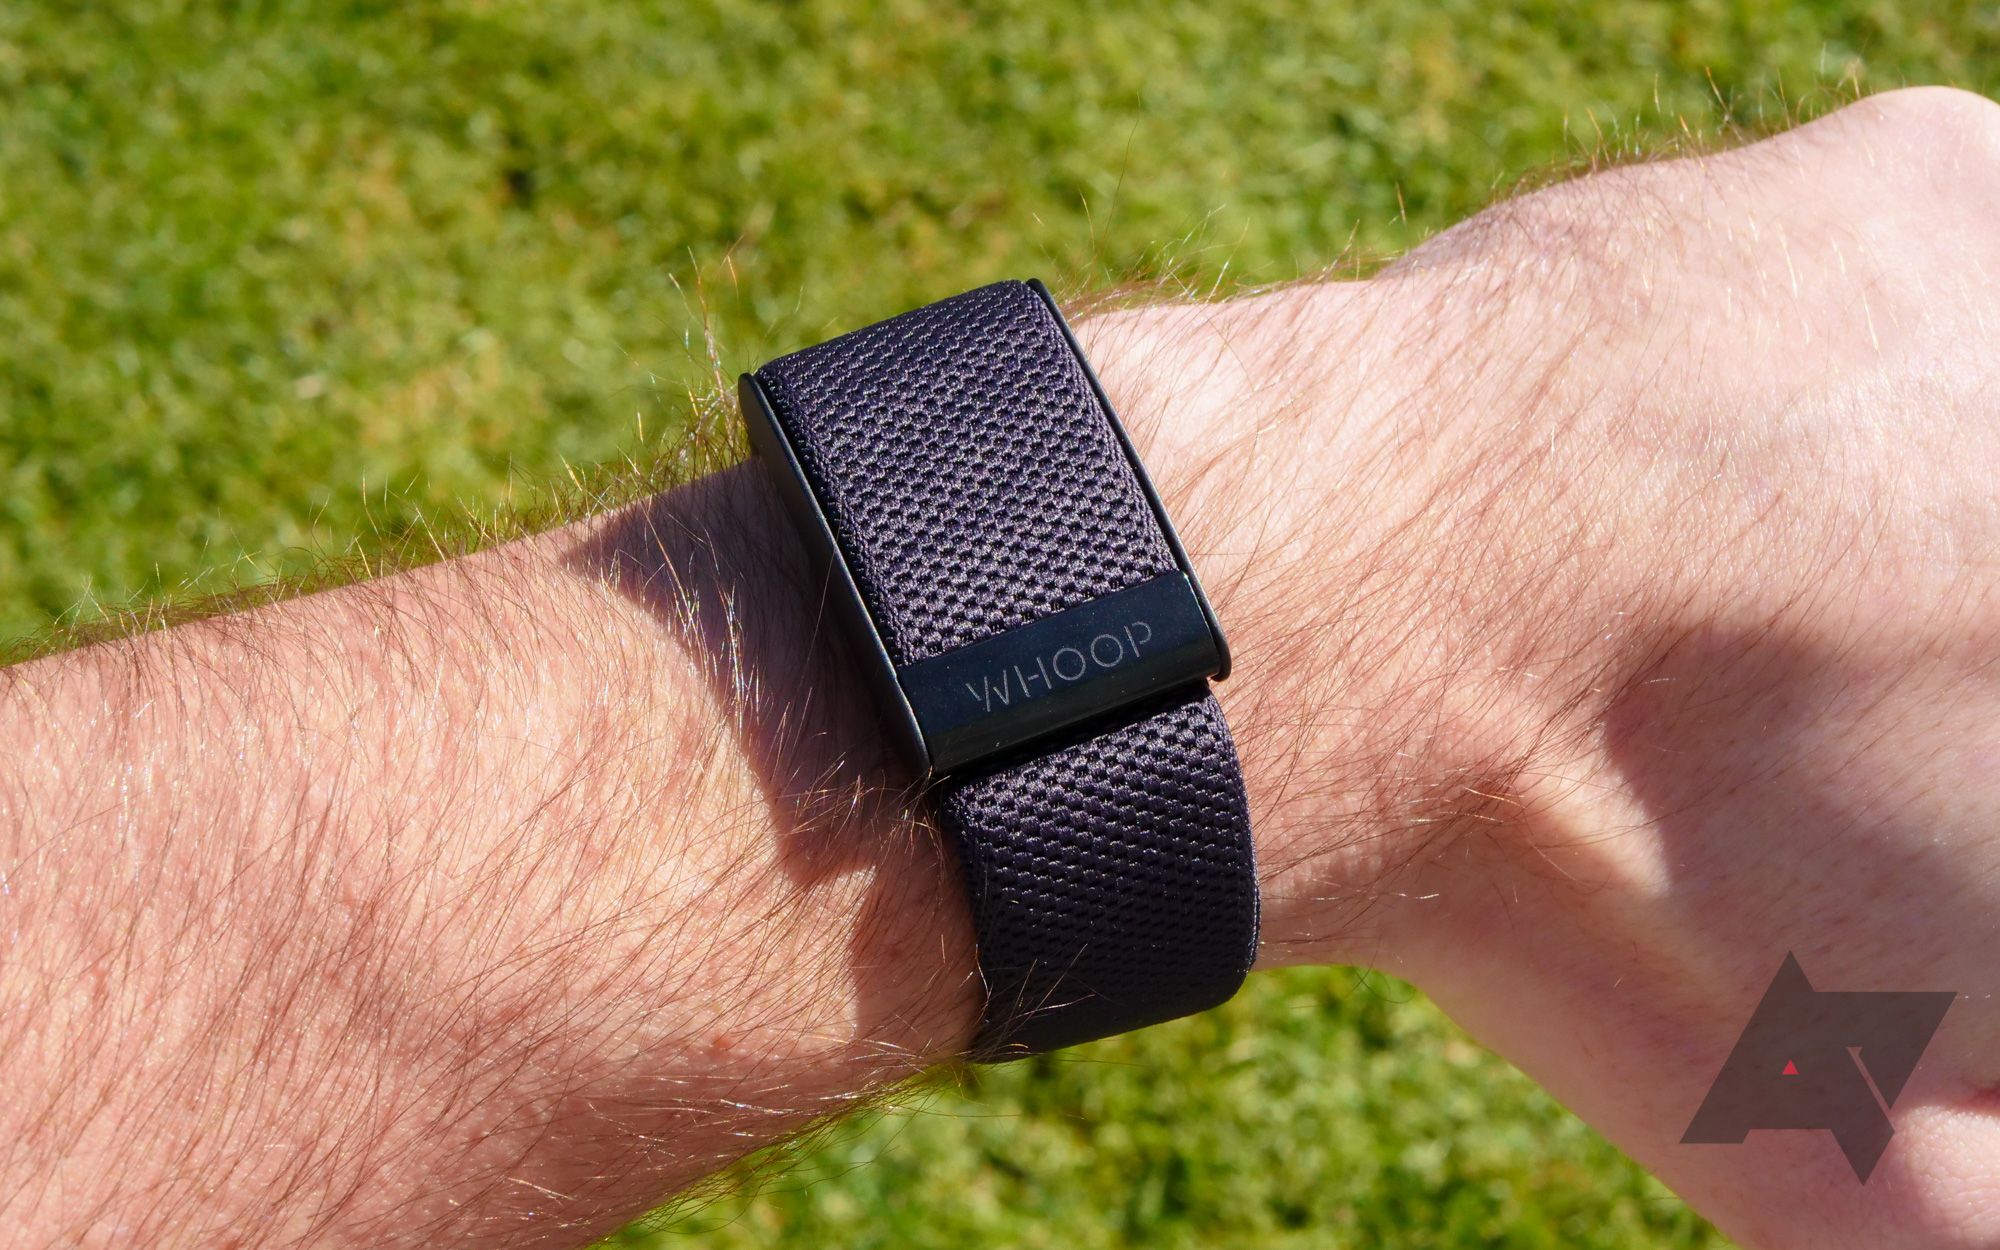 A black Whoop 4.0 tracker being worn on a wrist on a sunny day